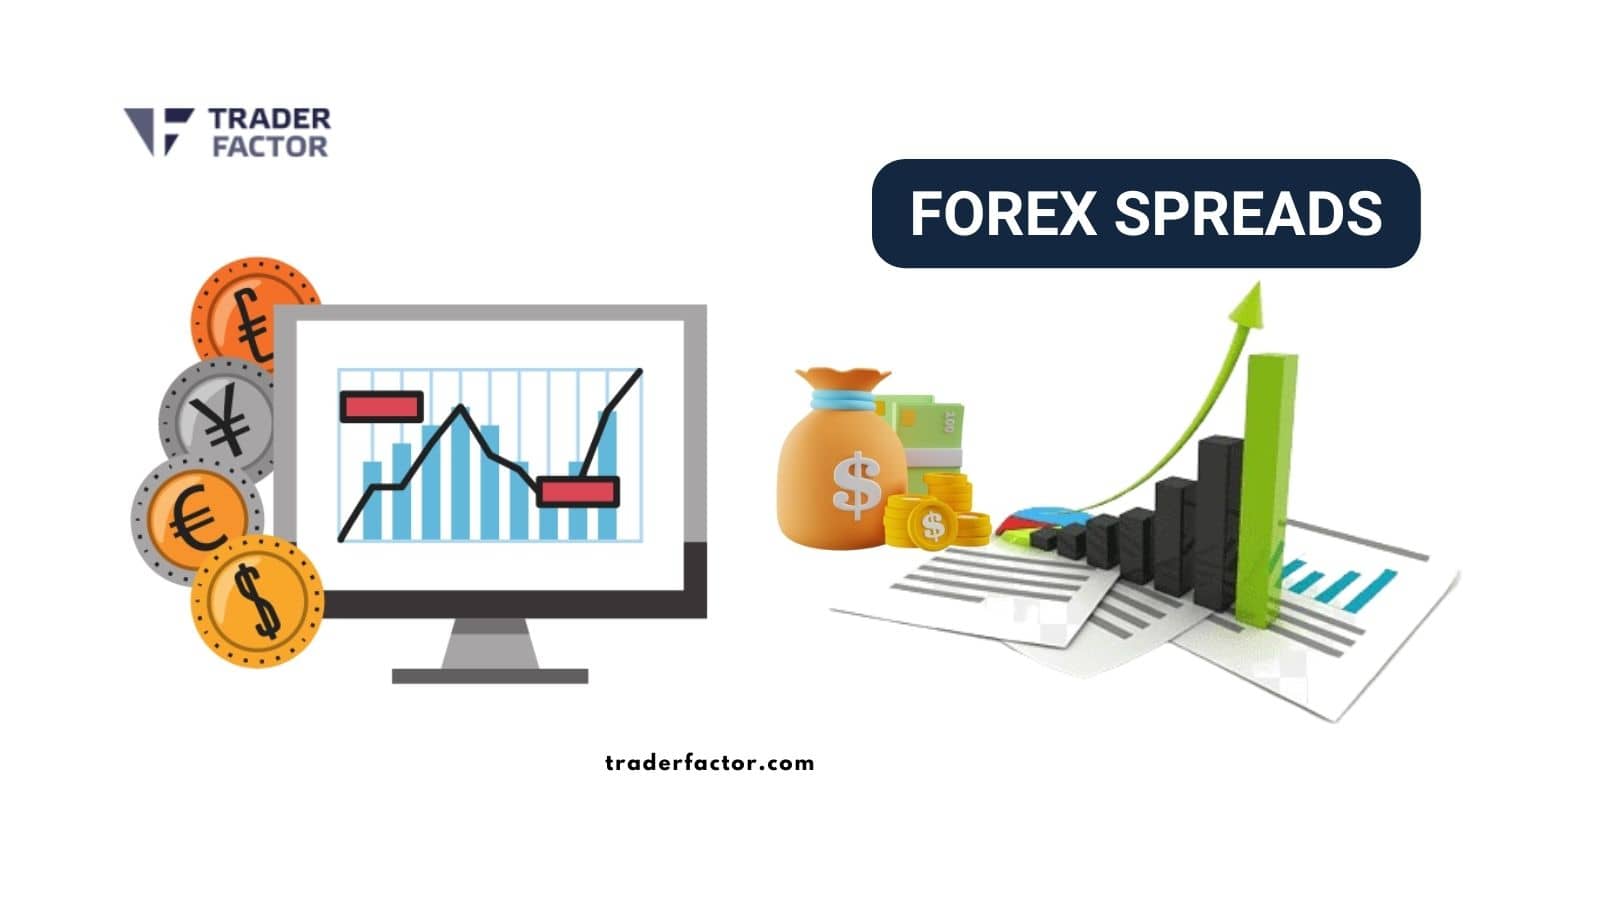 Forex spreads